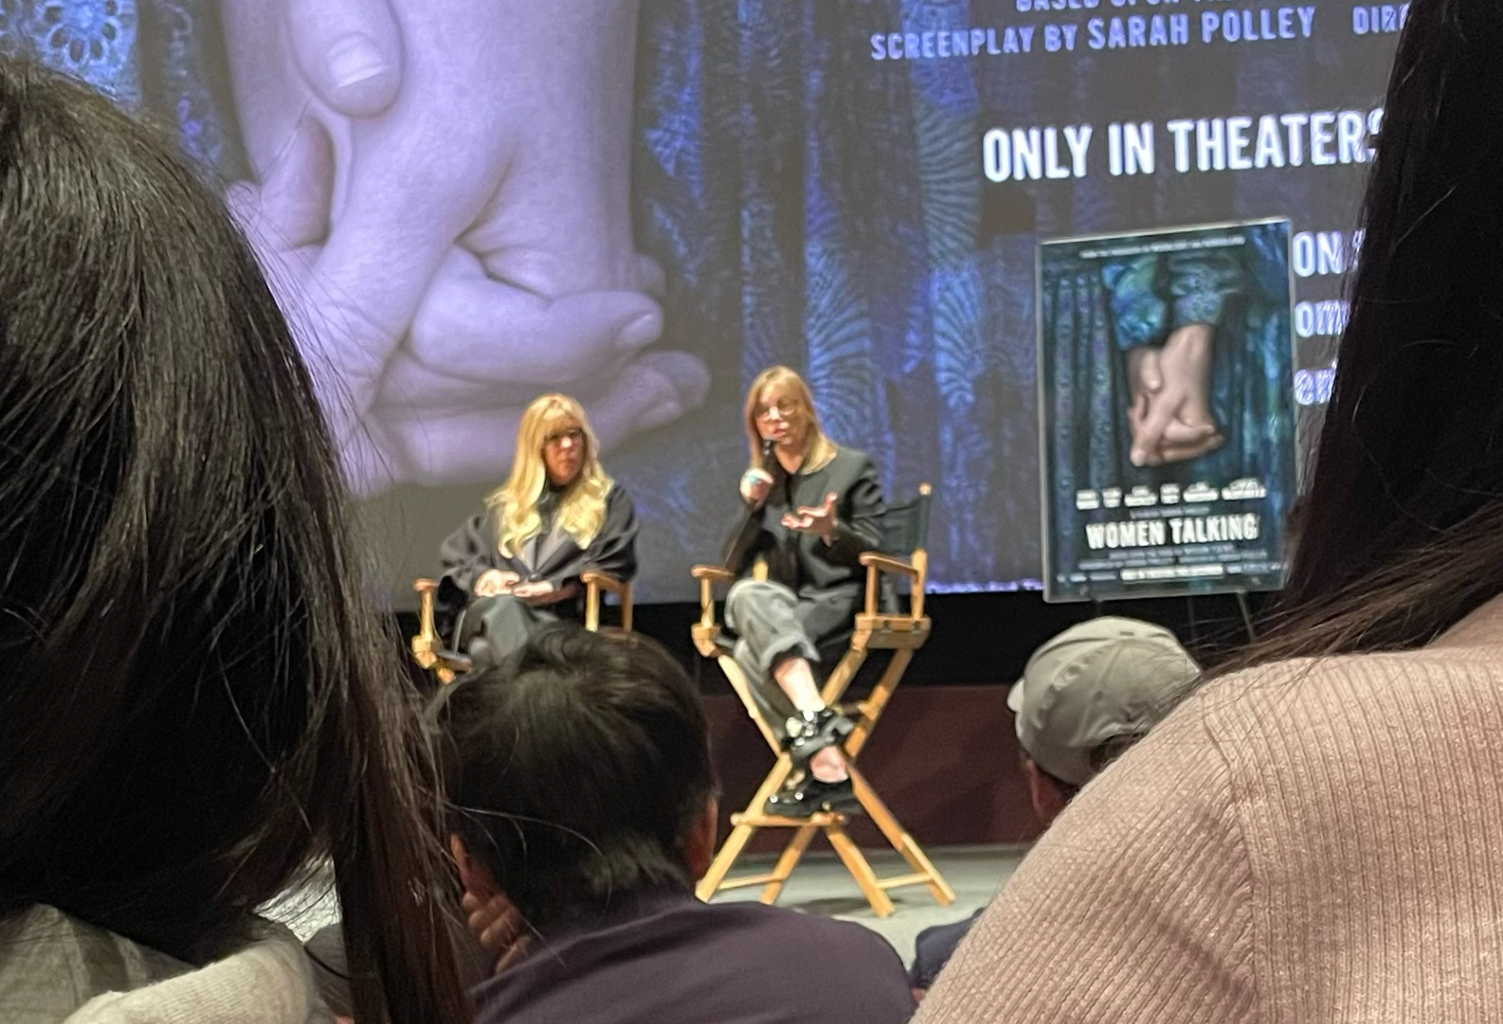 Two women in director\'s chairs on a stage discussing the film Women Talking.